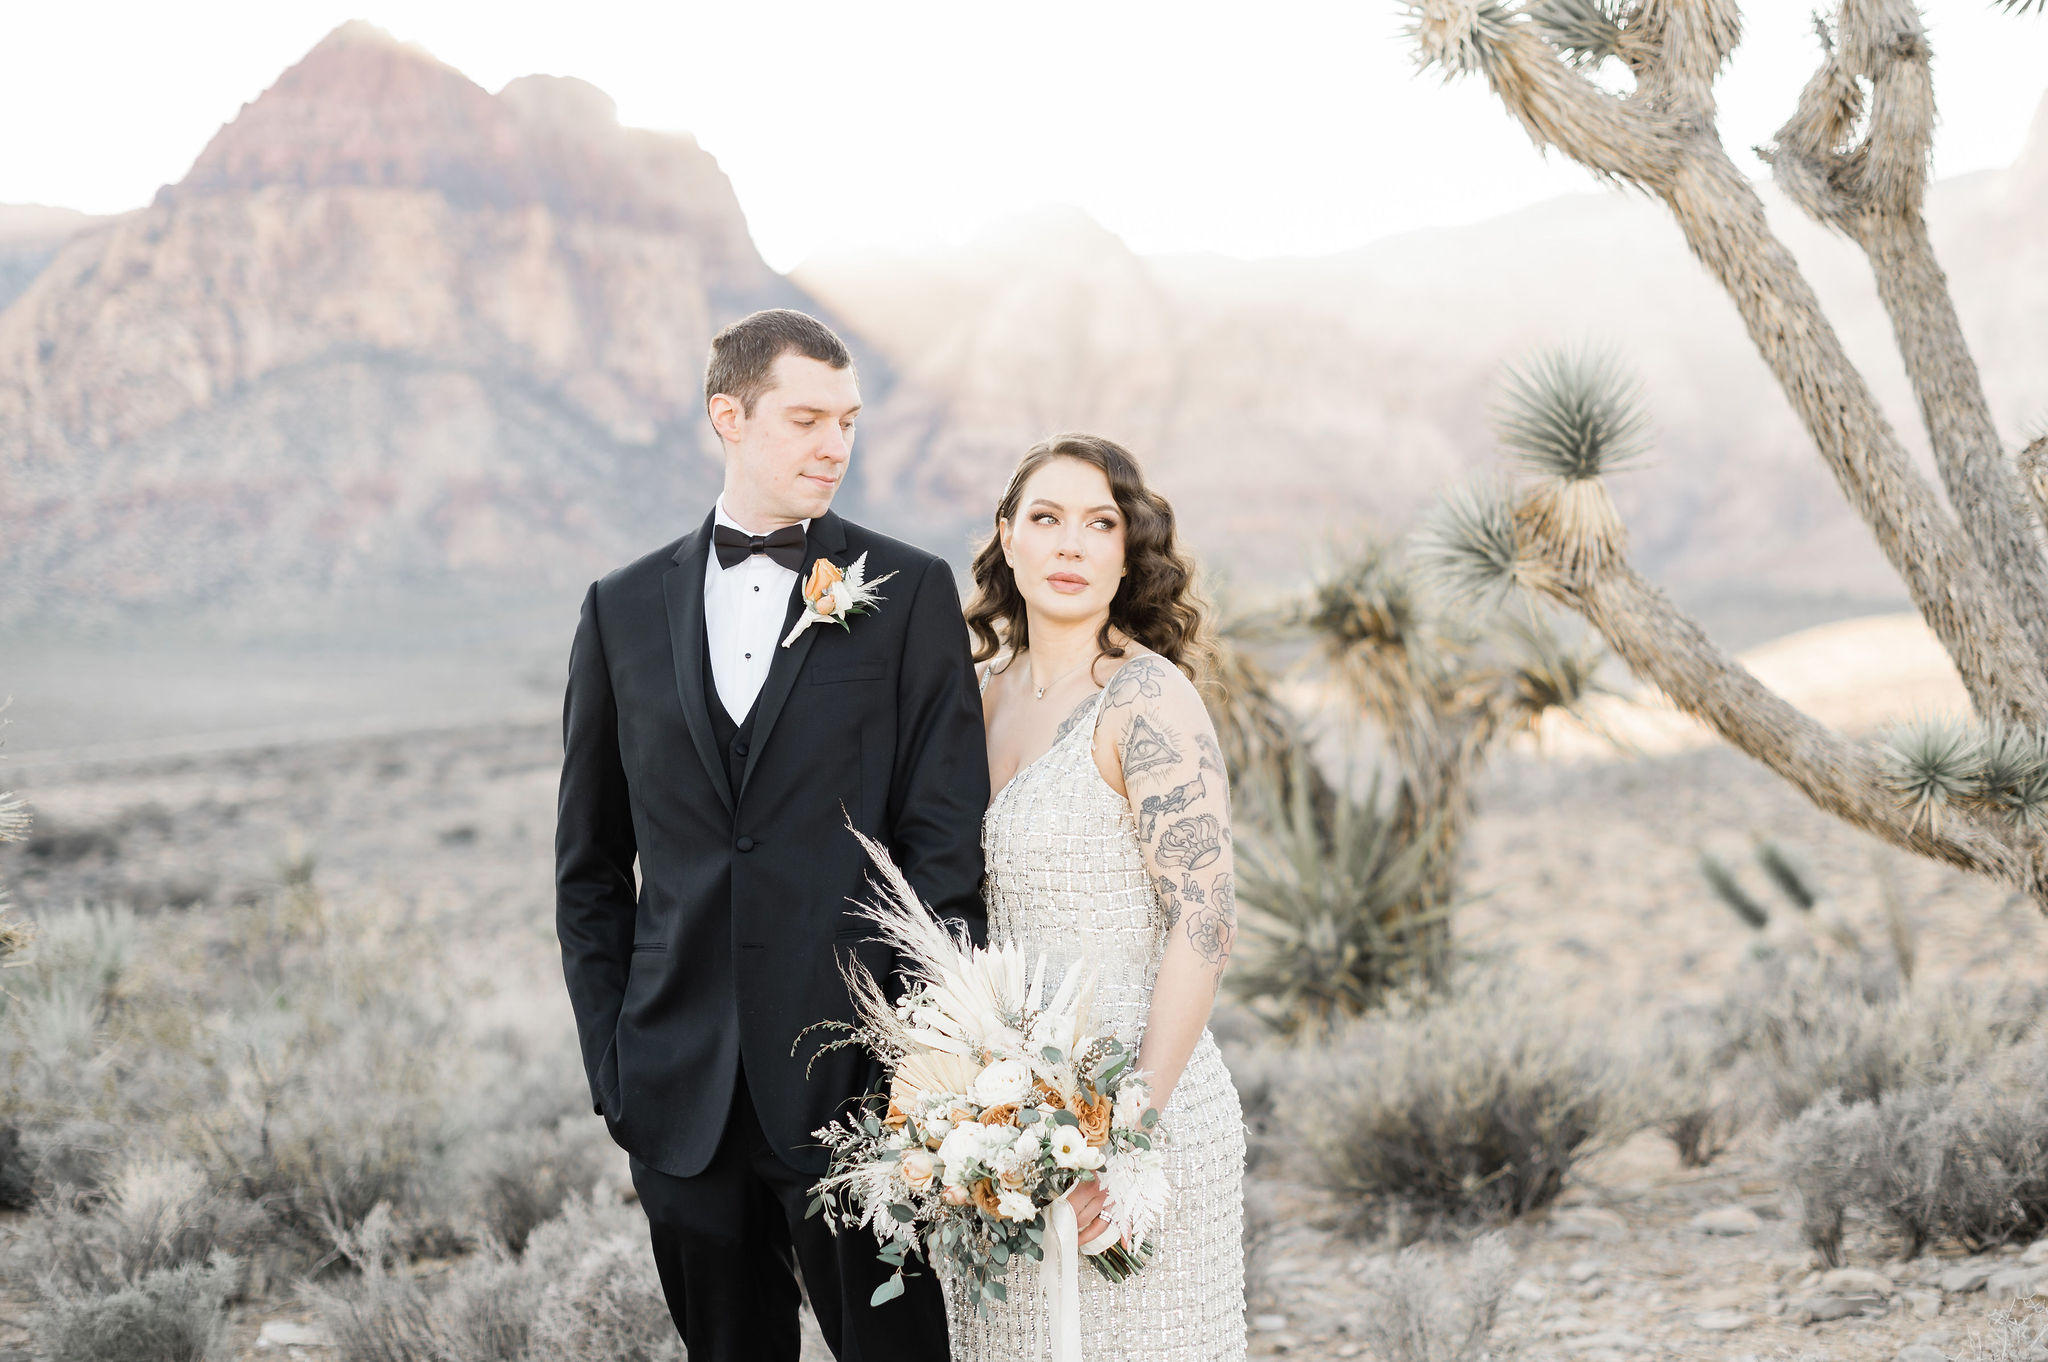 Bride and groom posing for their elopement shoot organized by Elopement Las Vegas